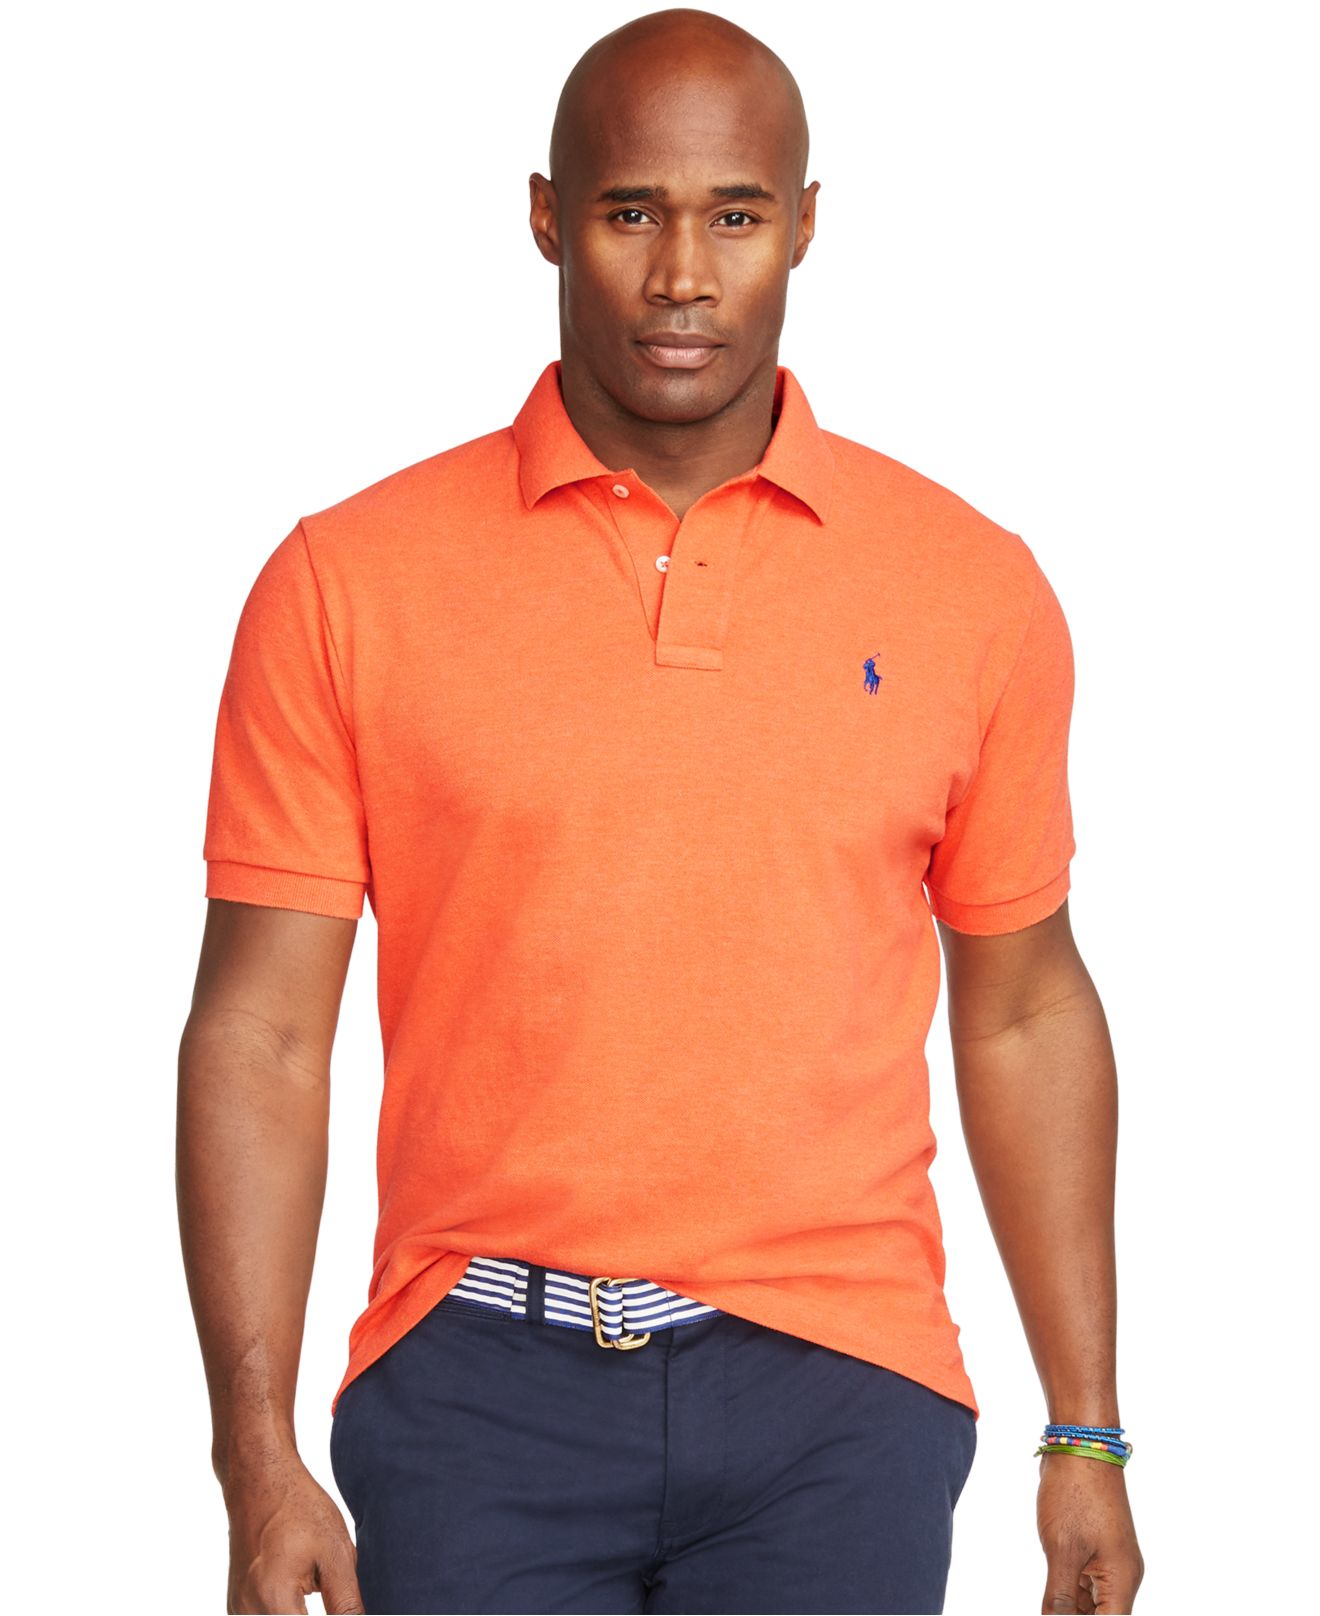 Lyst Polo Ralph Lauren  Men s Big And Tall Classic fit 